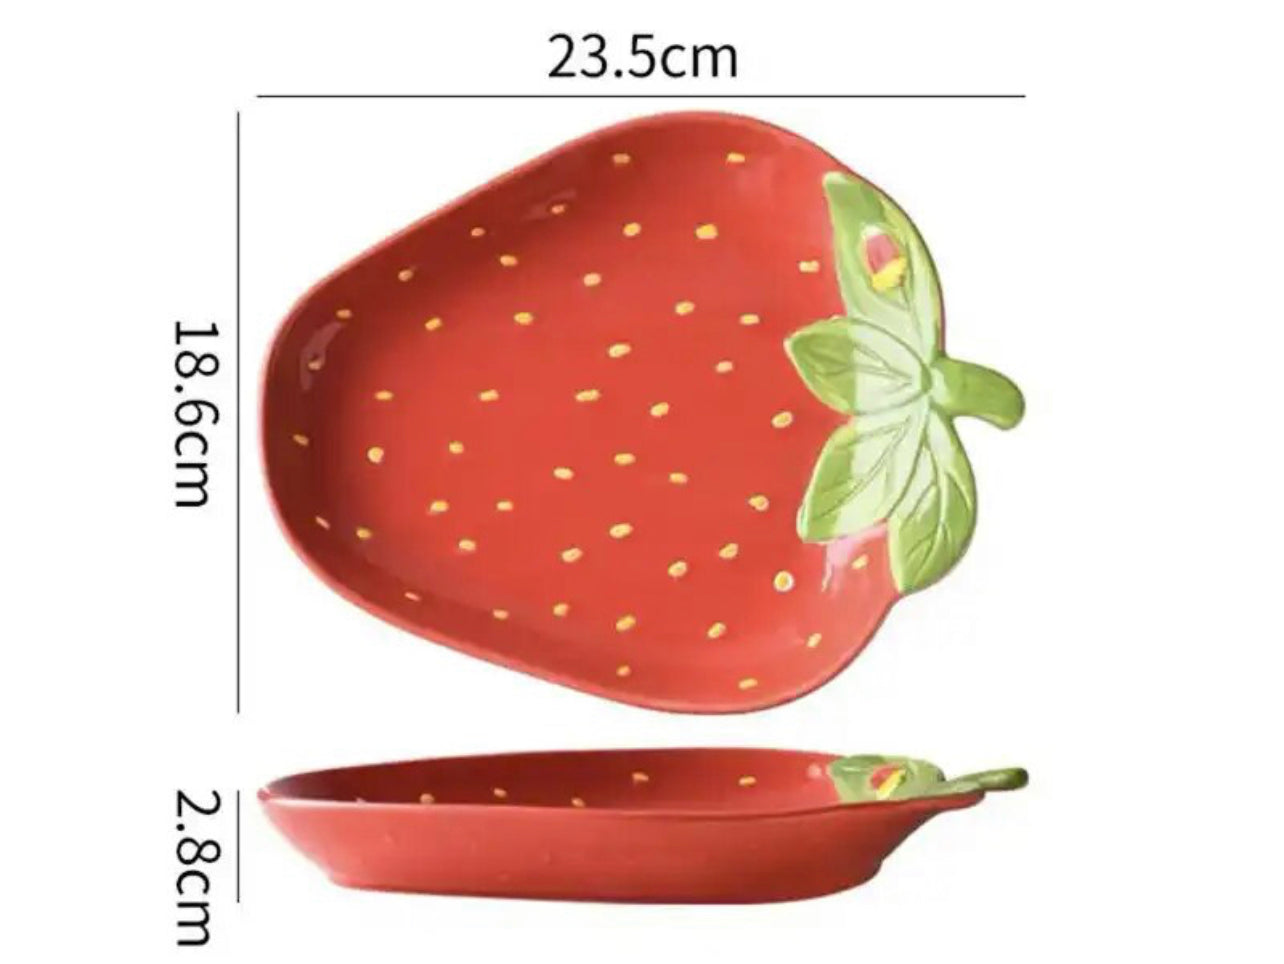 The Strawberry Dishes